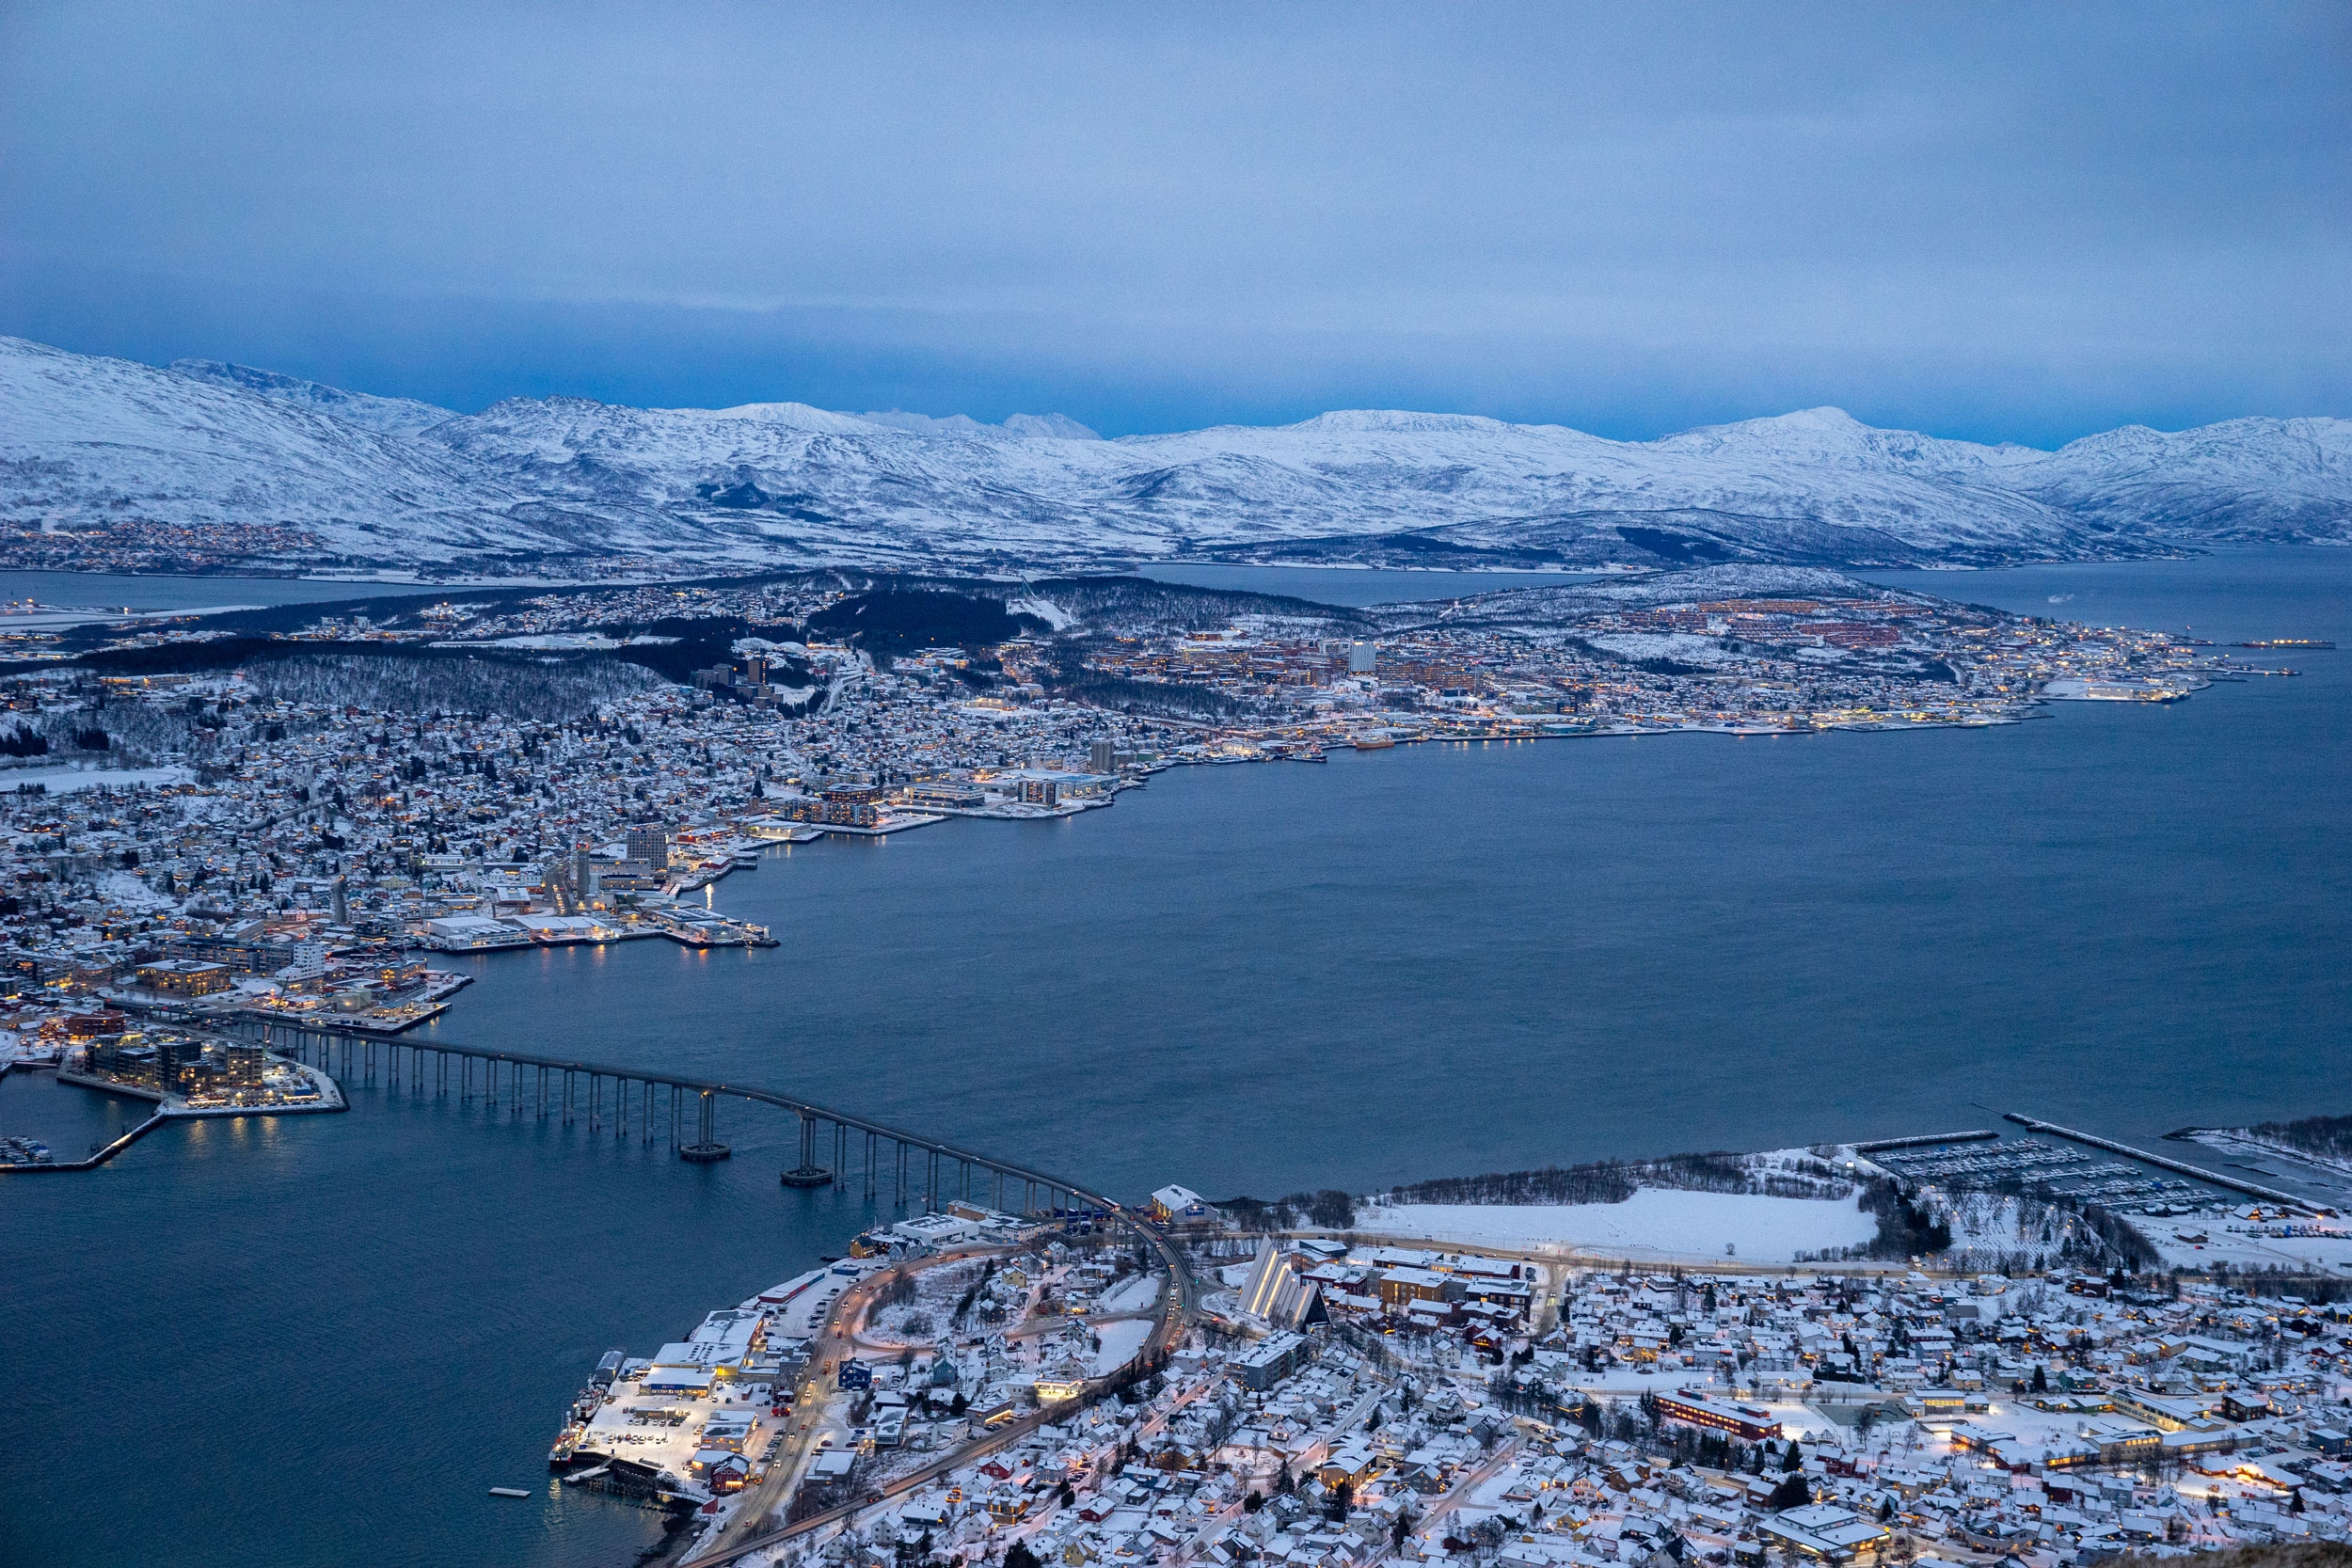 An aerial view of a snowy city on the banks of a large body of water. A bridge connects two parts of the city.